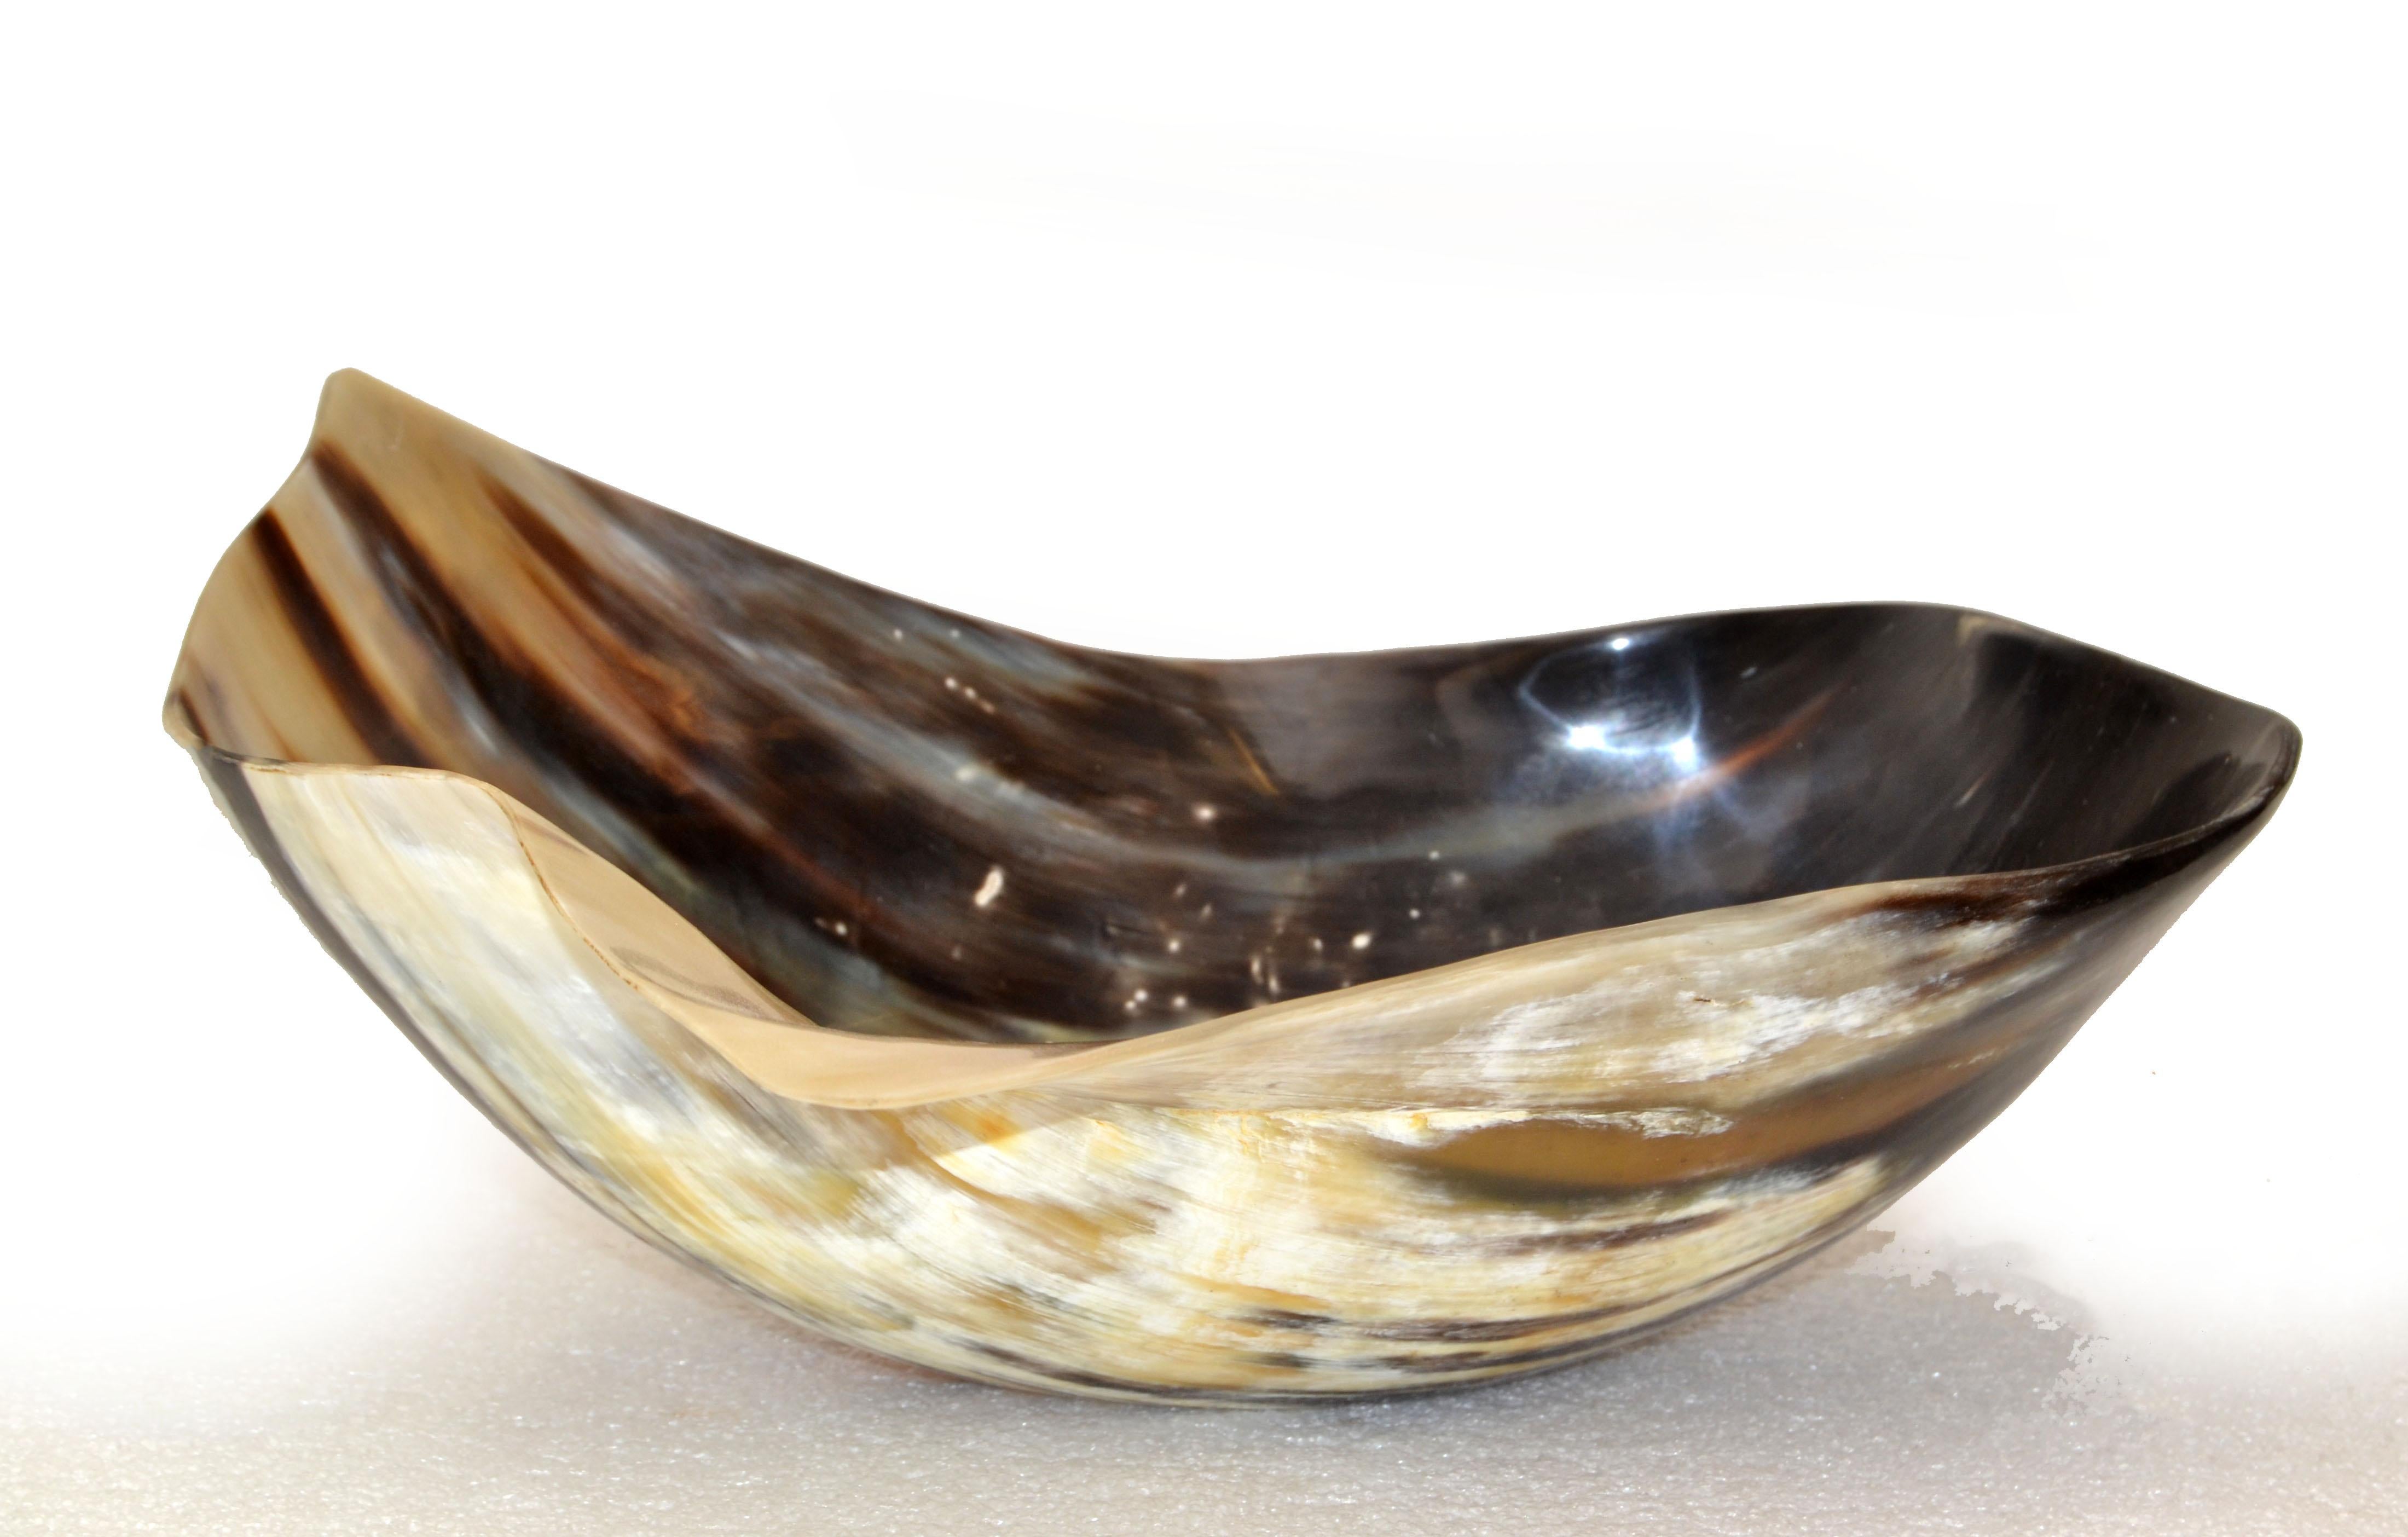 Mid-Century Modern natural handmade polished Horn vessel, bowl, catchall or centerpiece from the Mid-Century Modern era.